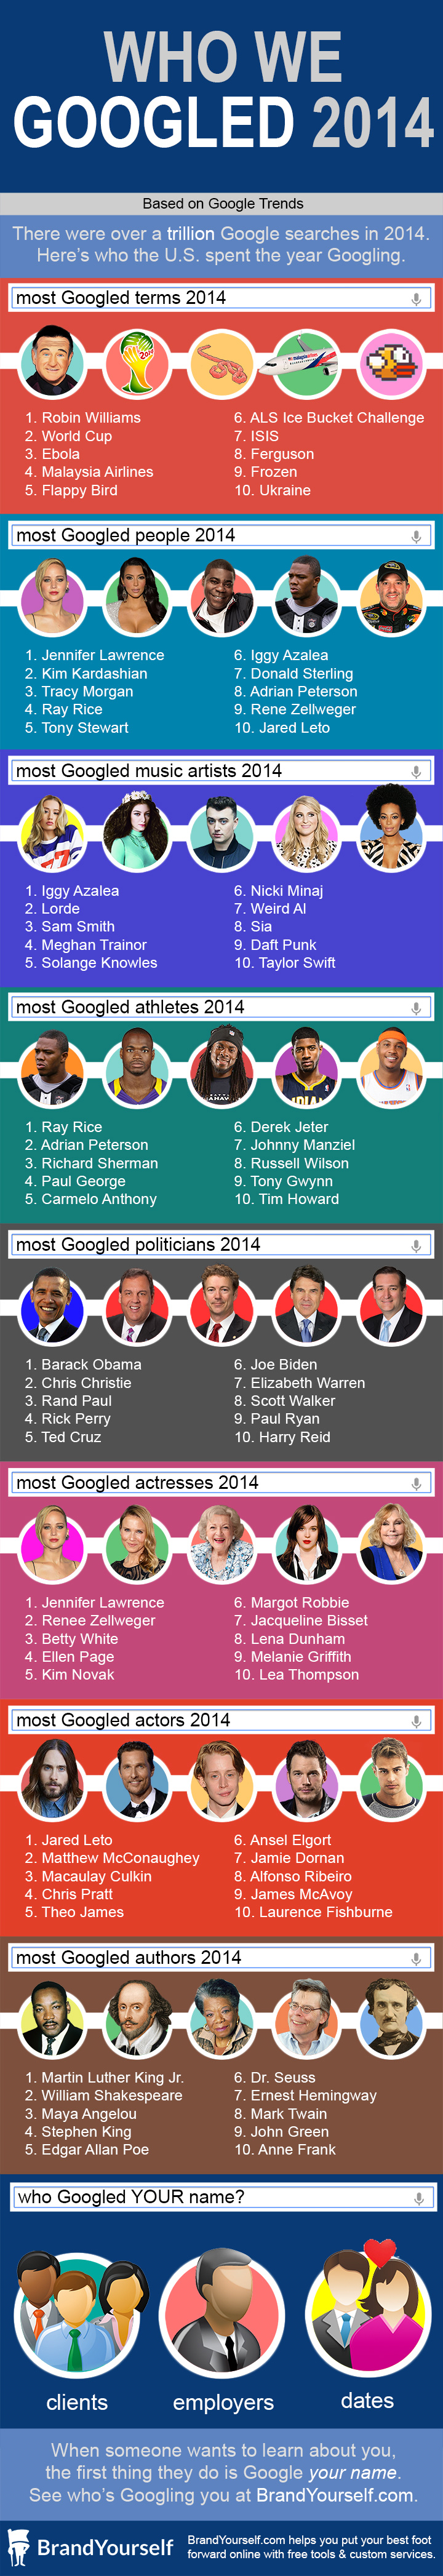 Who-We-Googled-2014-Infographic